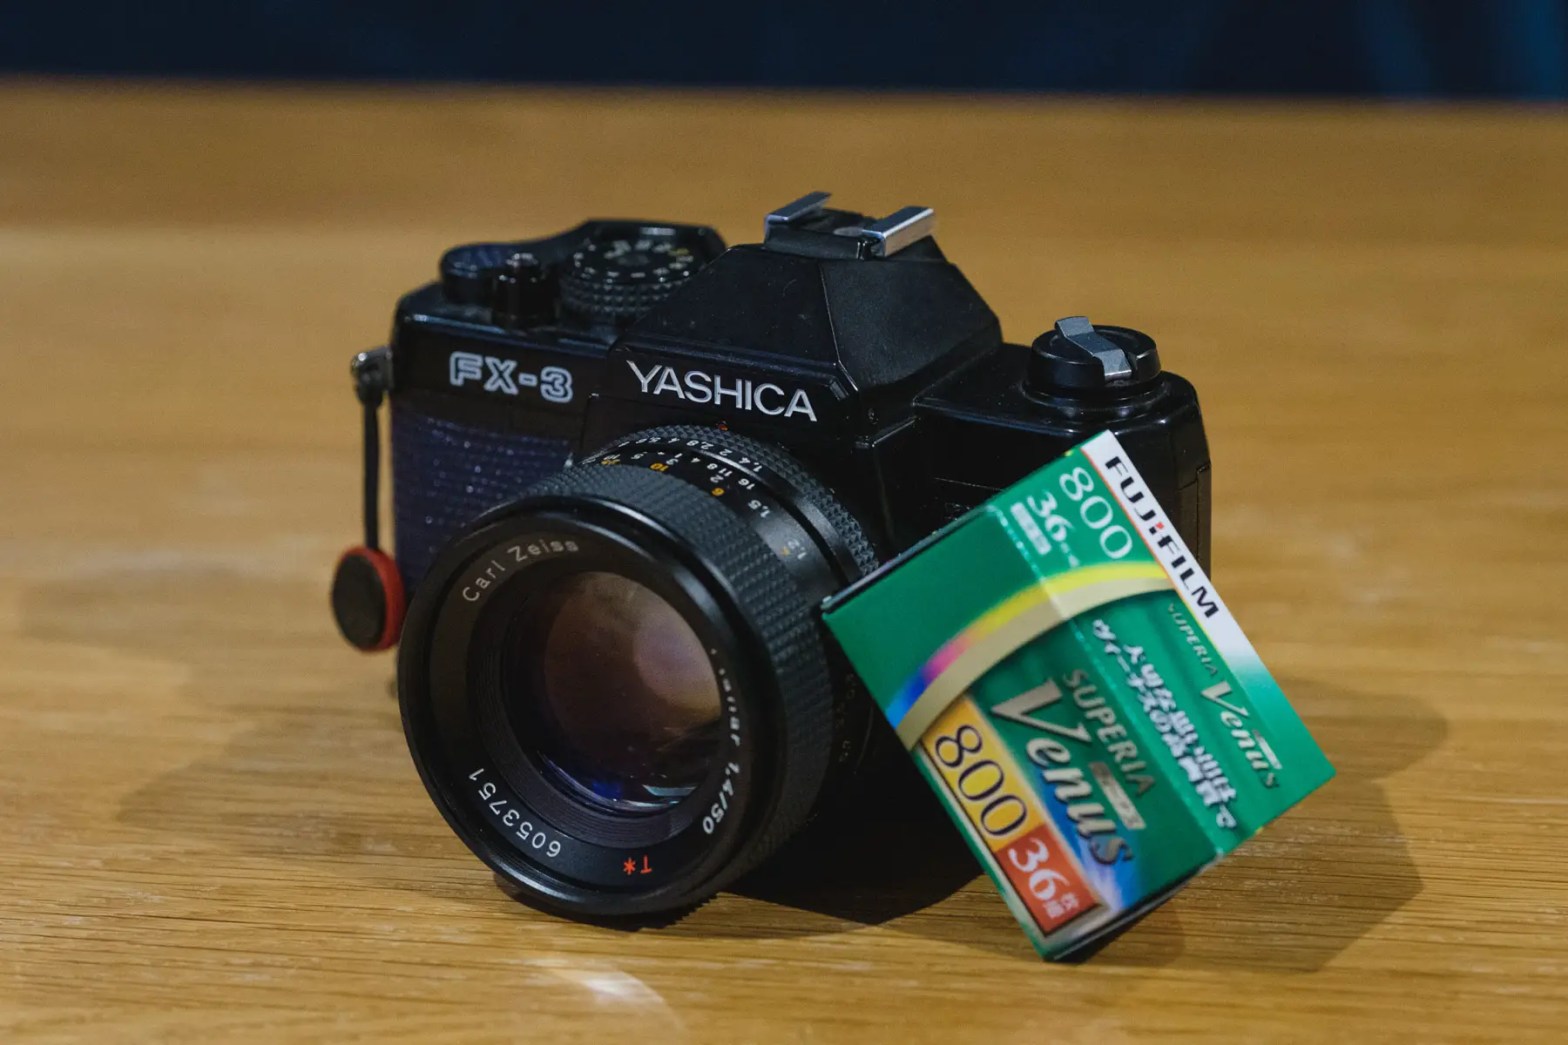 Gear - Yashica FX3 and Carl Zeiss Planar T* 50mm f/1.4 lens